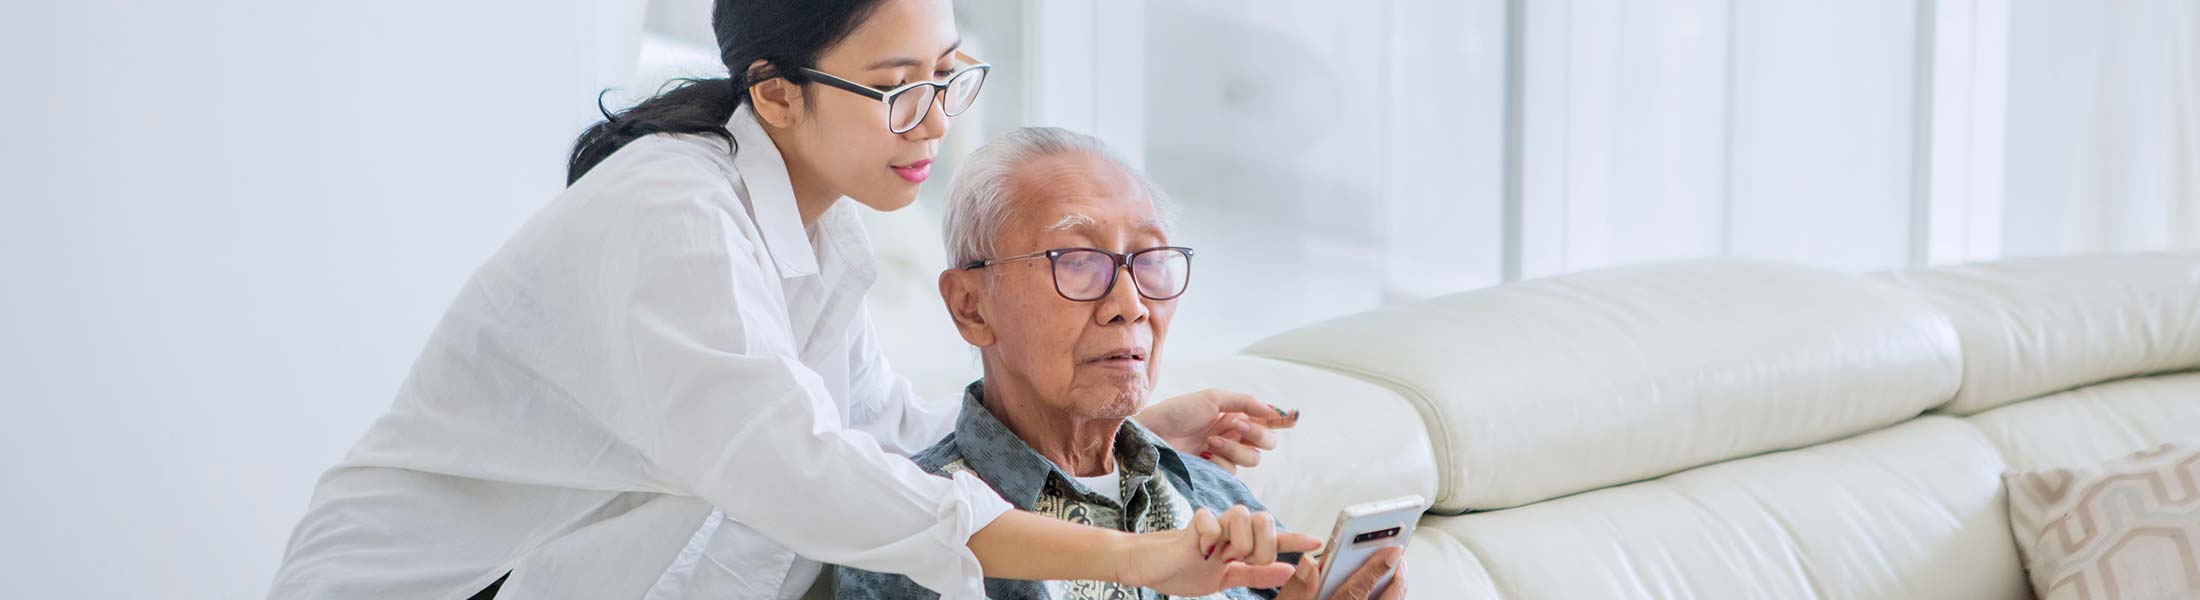 image of caregiver helping elderly person with smartphone